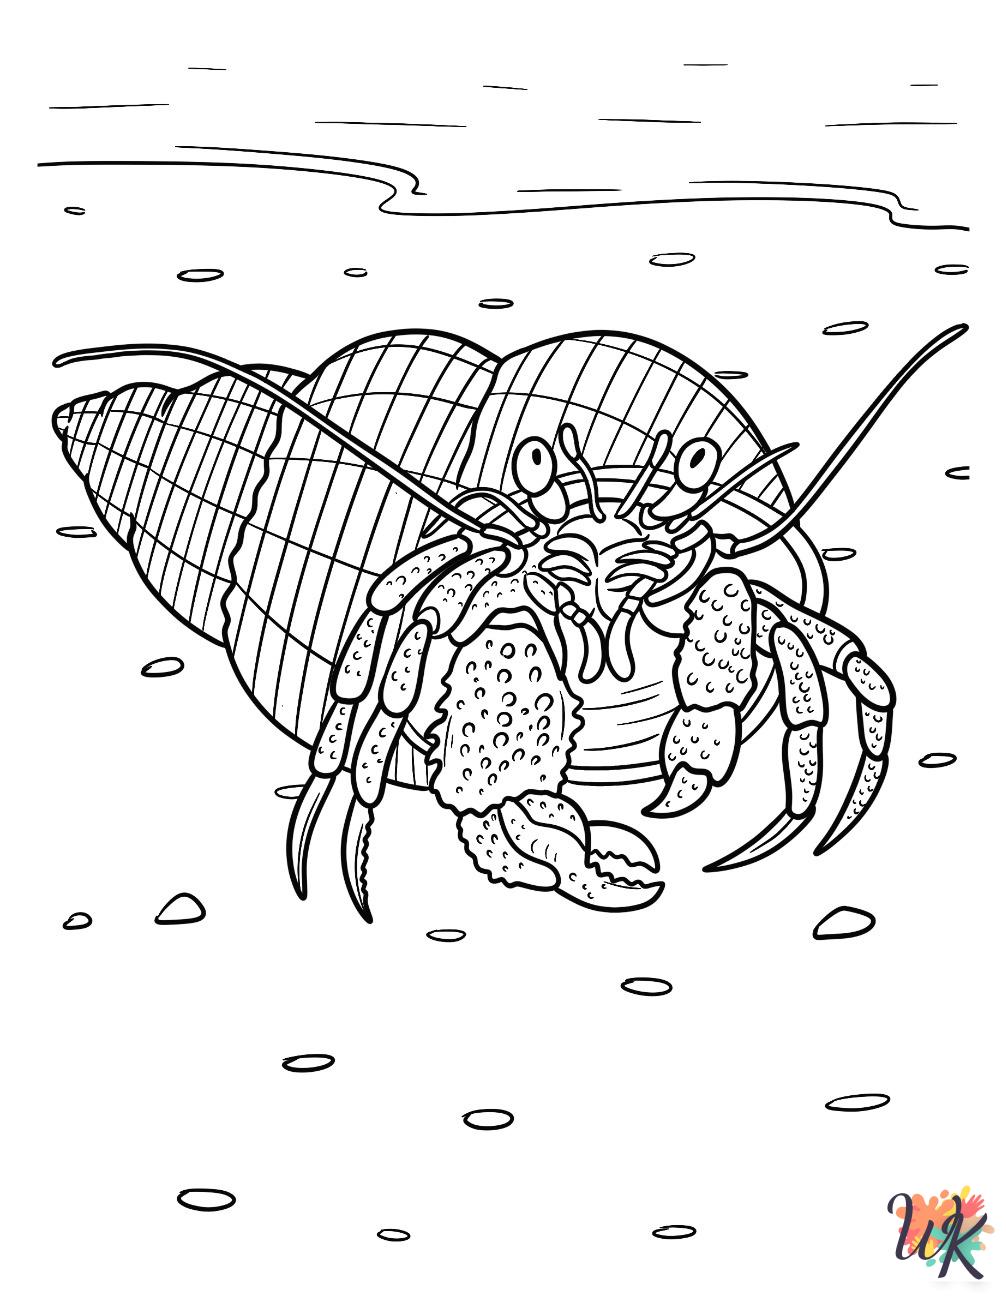 Crab coloring pages for preschoolers